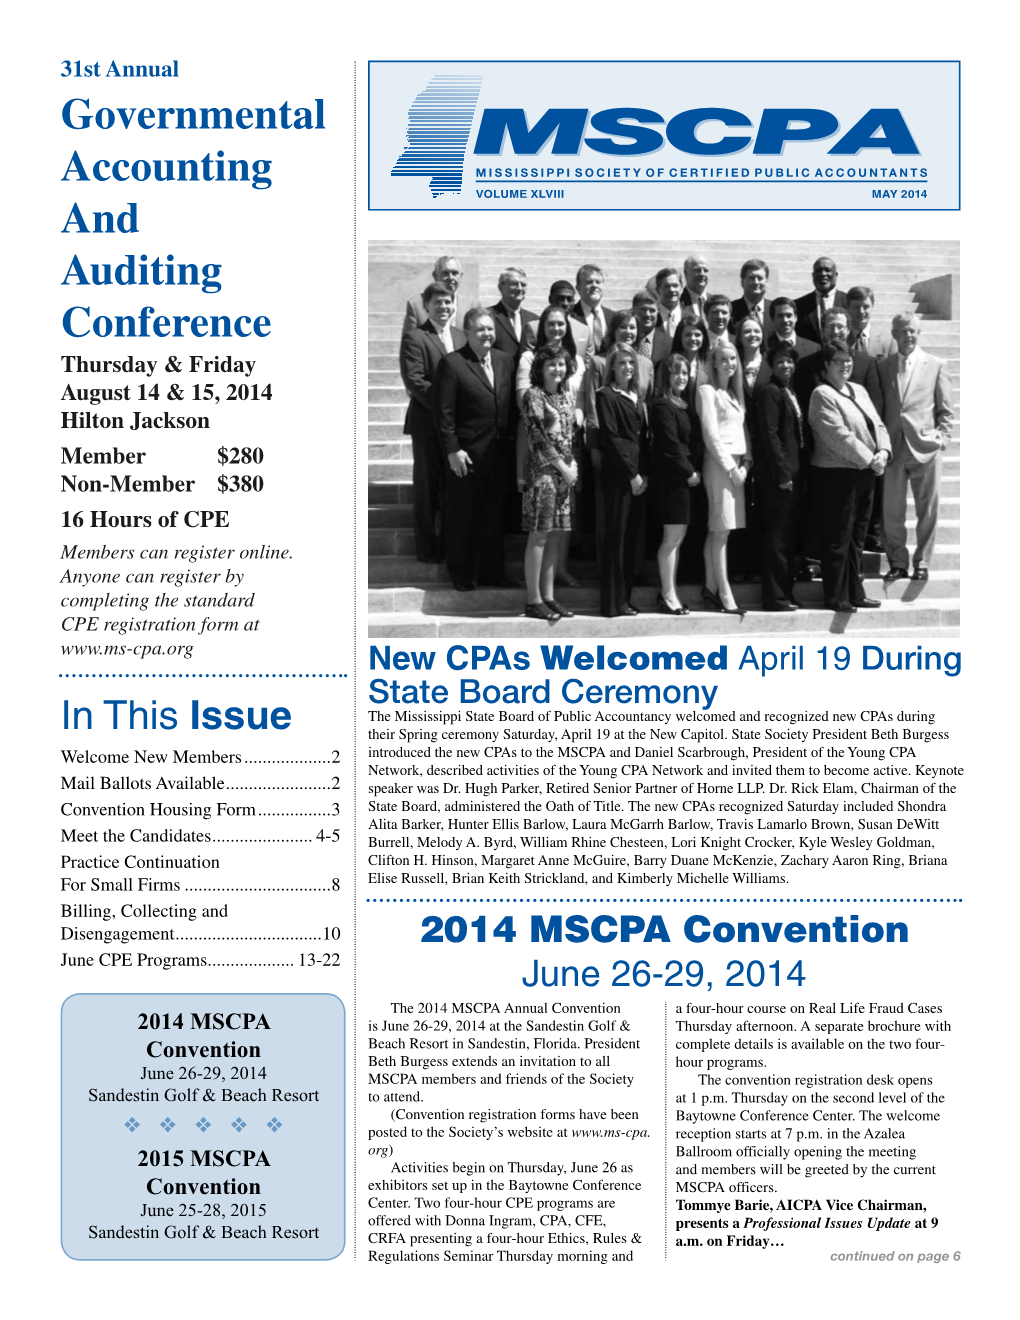 Governmental Accounting and Auditing Conference